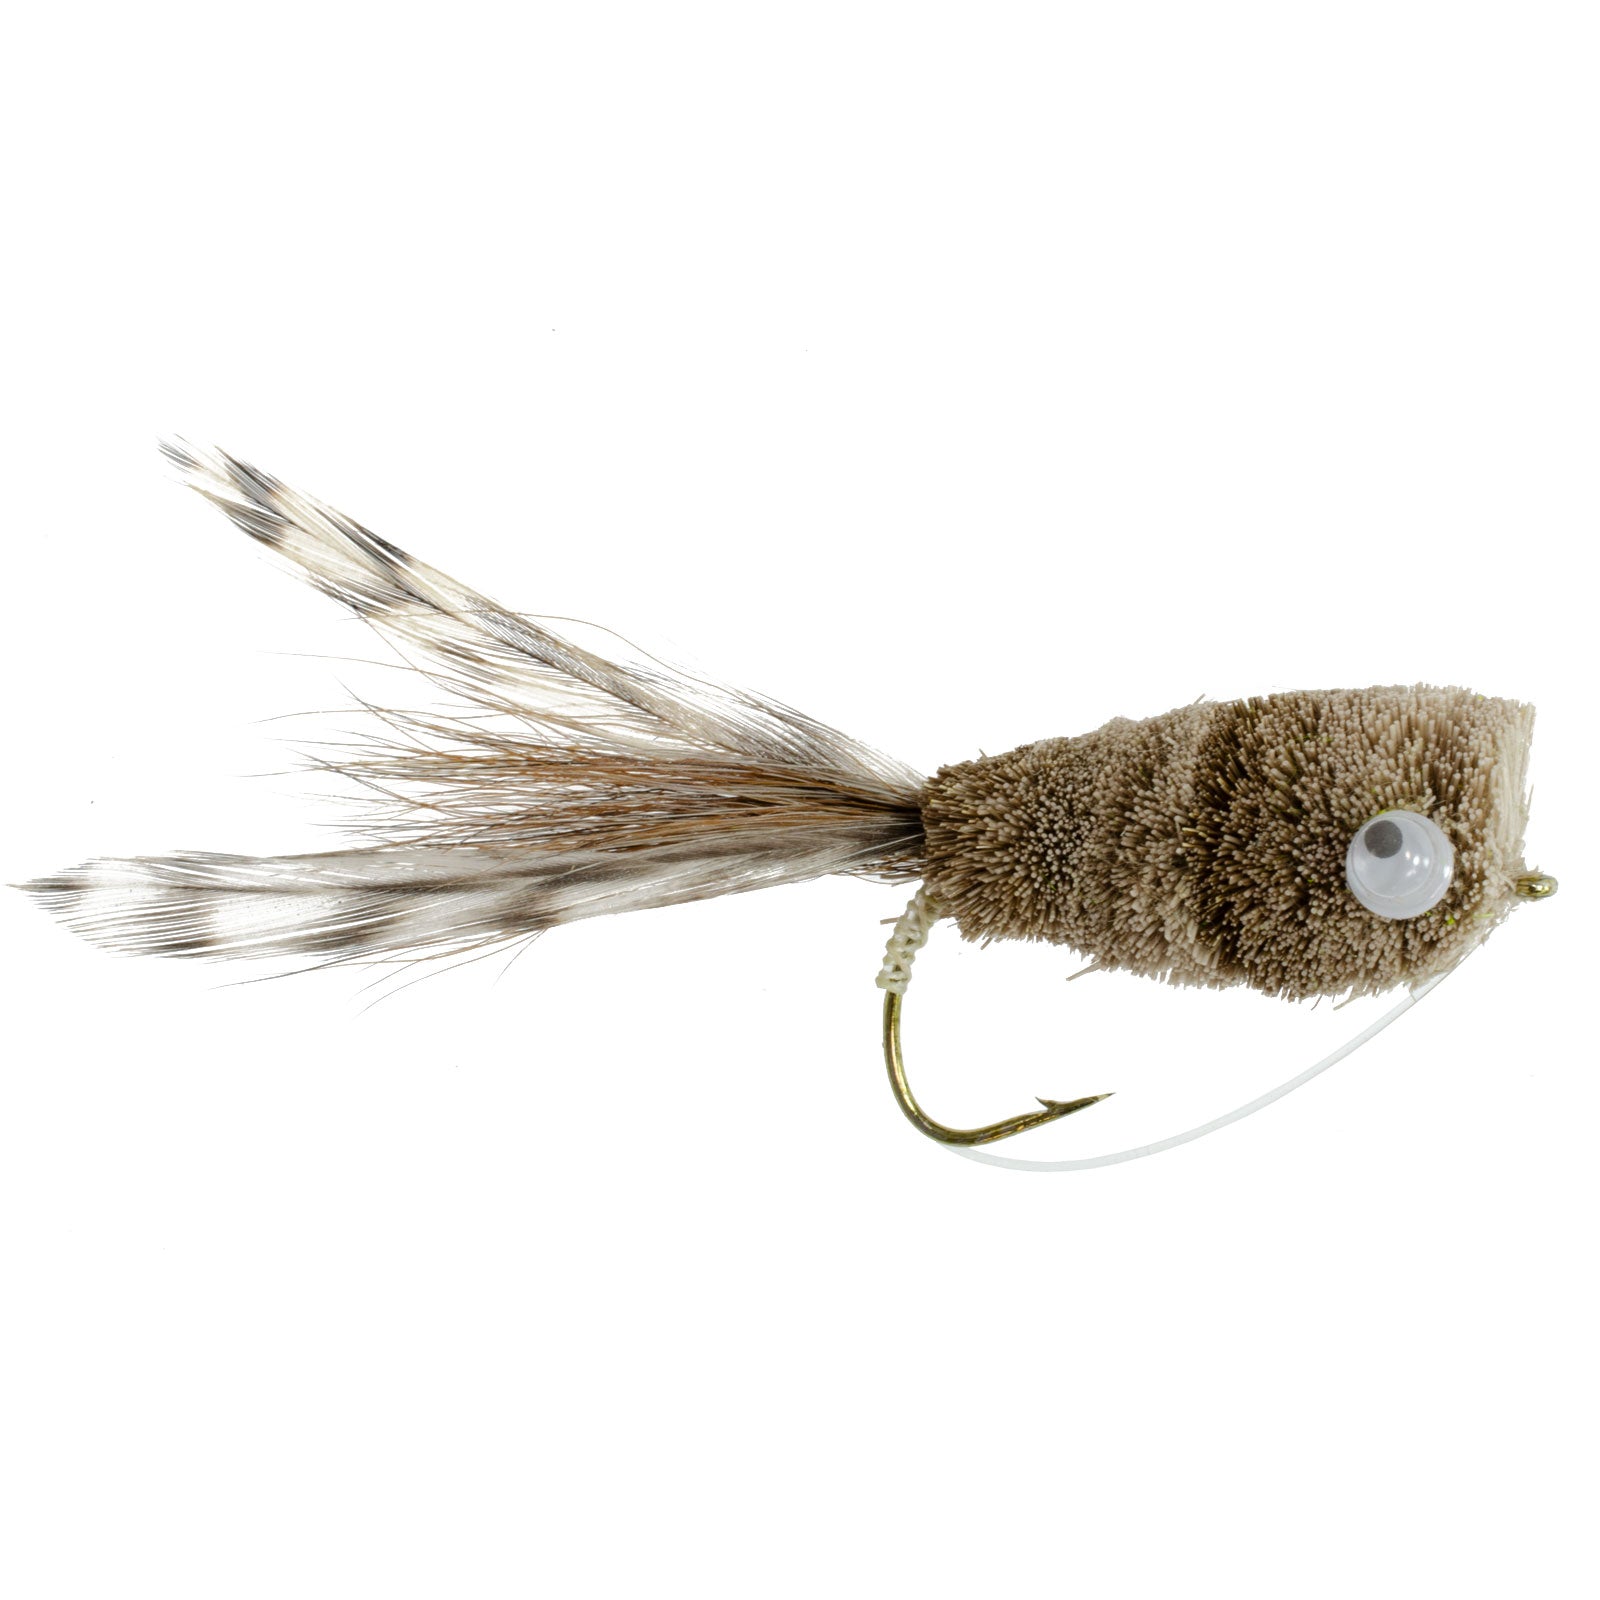 Natural Deer Hair and Grizzly Bass Popper Size 8 Bass Fly Fishing Bug Wide Gape Bass Hooks With Weed Guard